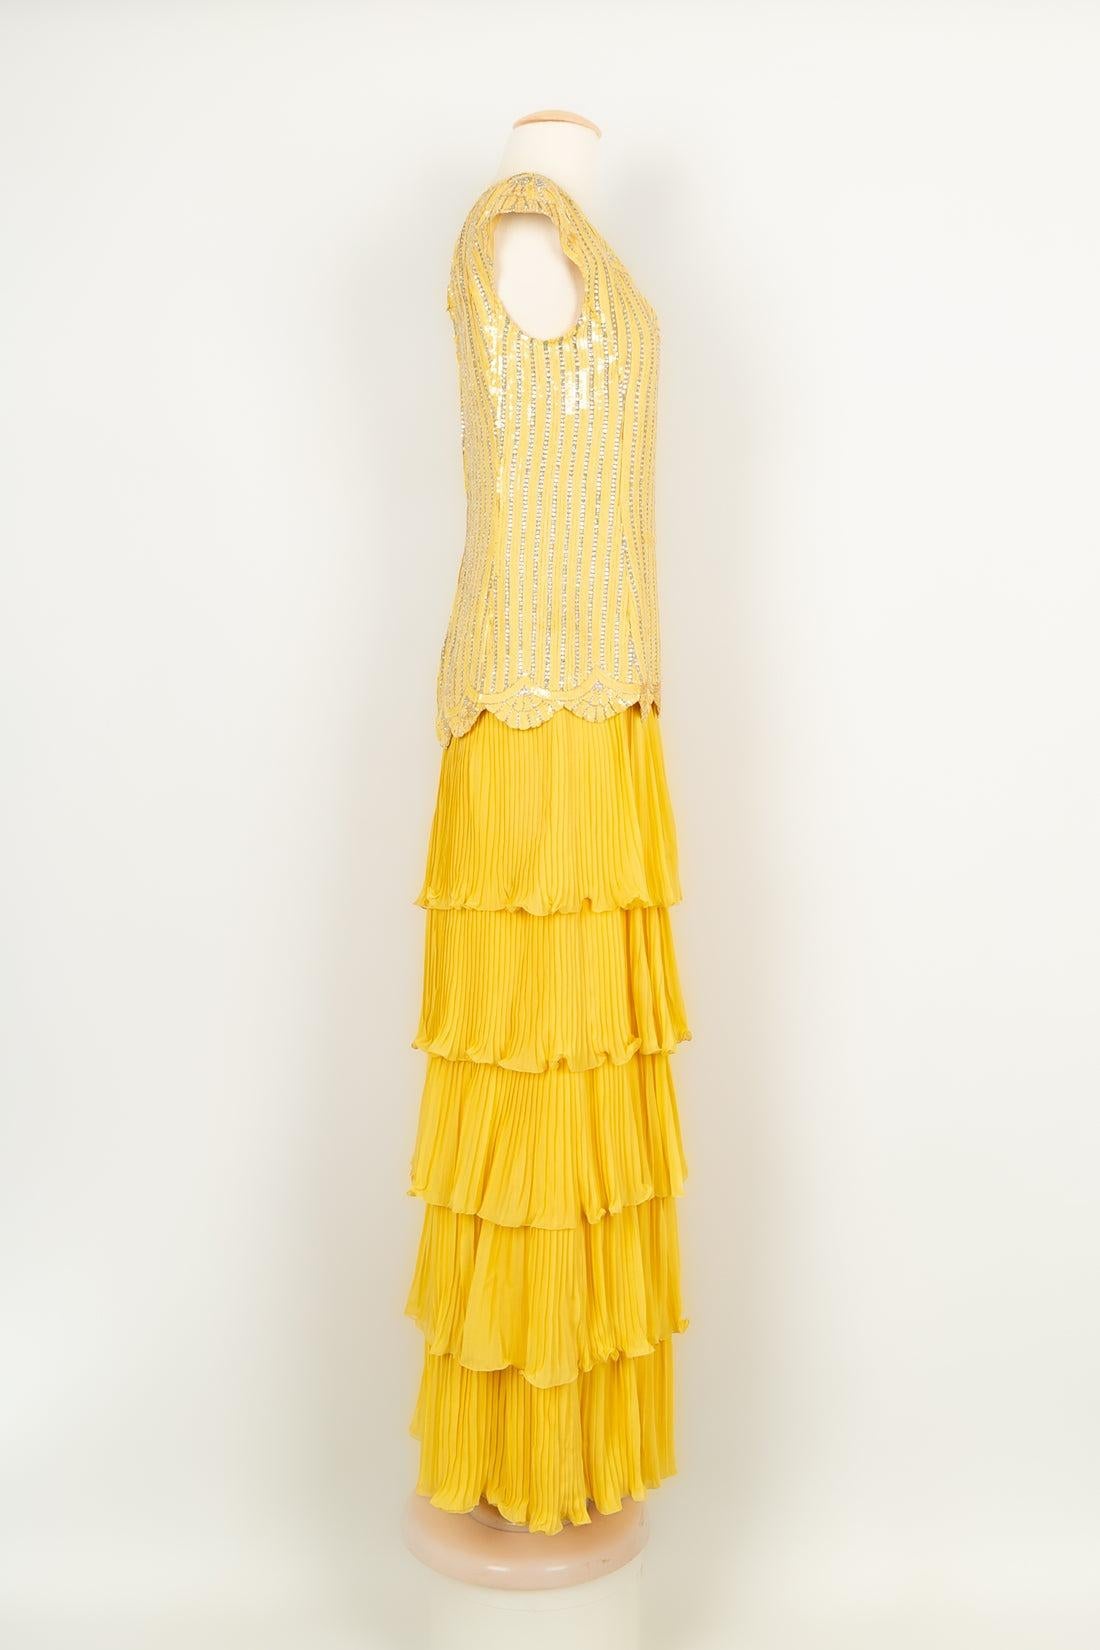 Valentino - Set Haute Couture composed of a top entirely embroidered with pearls and sequins, and a pleated skirt in silk crepe. No size indicated, it fits a 36FR.

Additional information:
Condition: Very good condition
Dimensions: Top: Chest: 45 cm